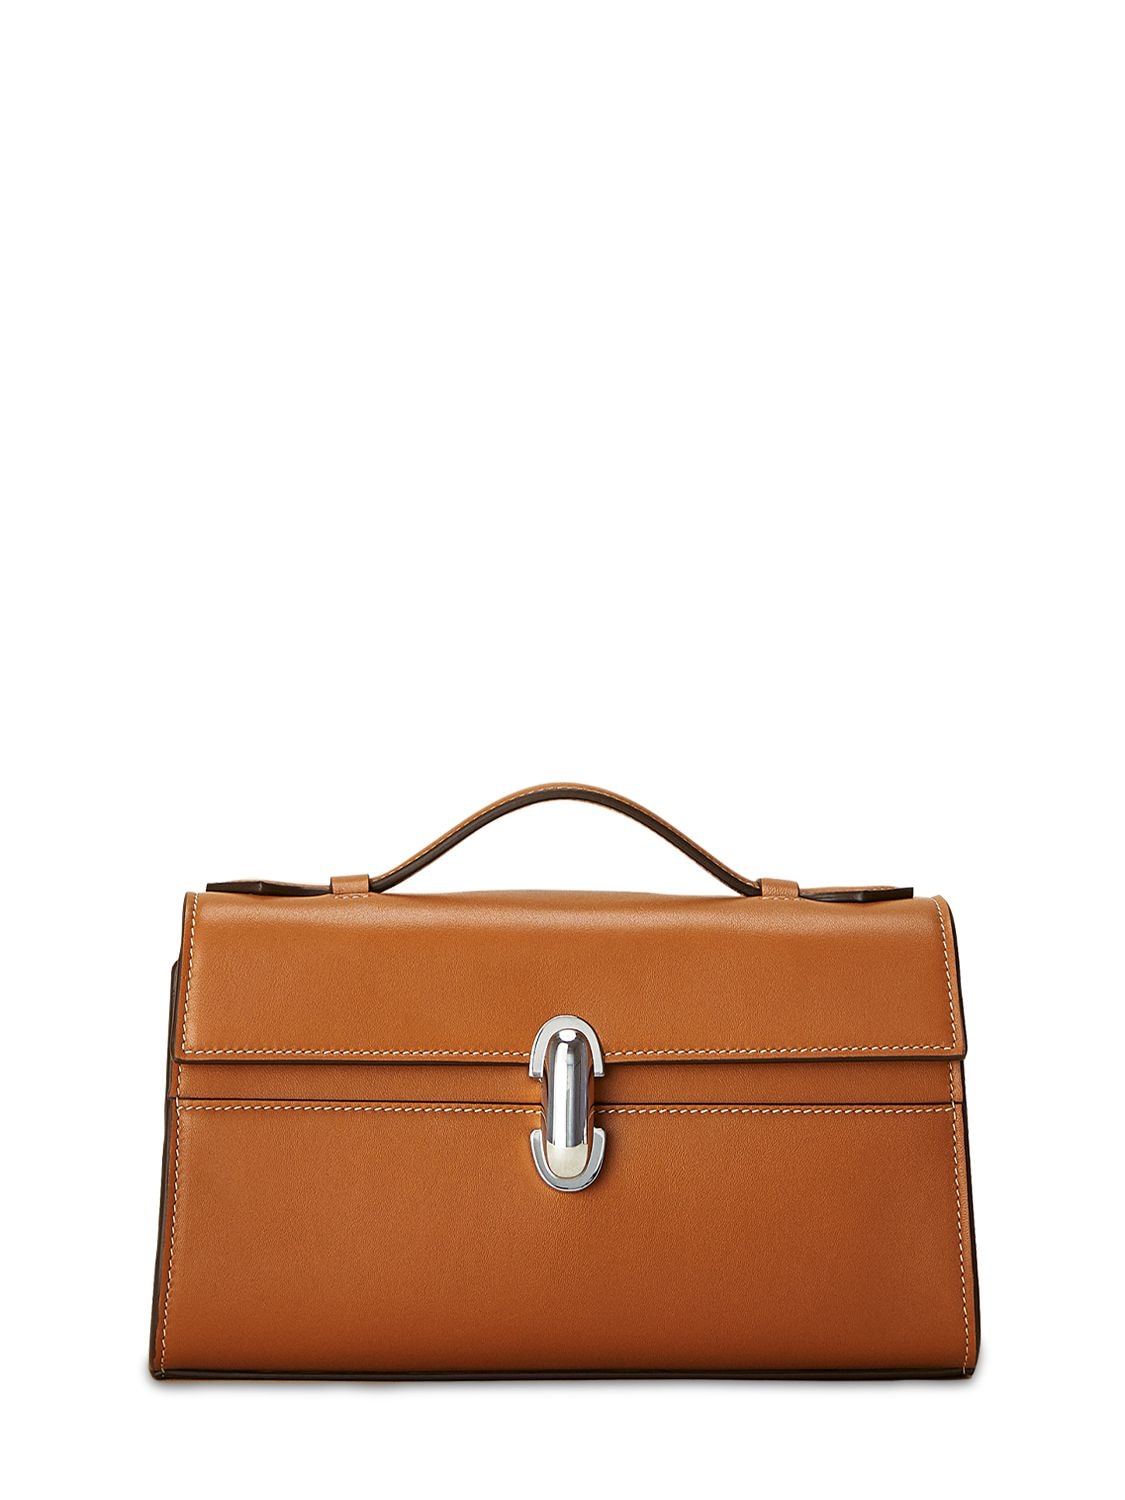 SAVETTE THE SYMMETRY LEATHER TOP HANDLE BAG